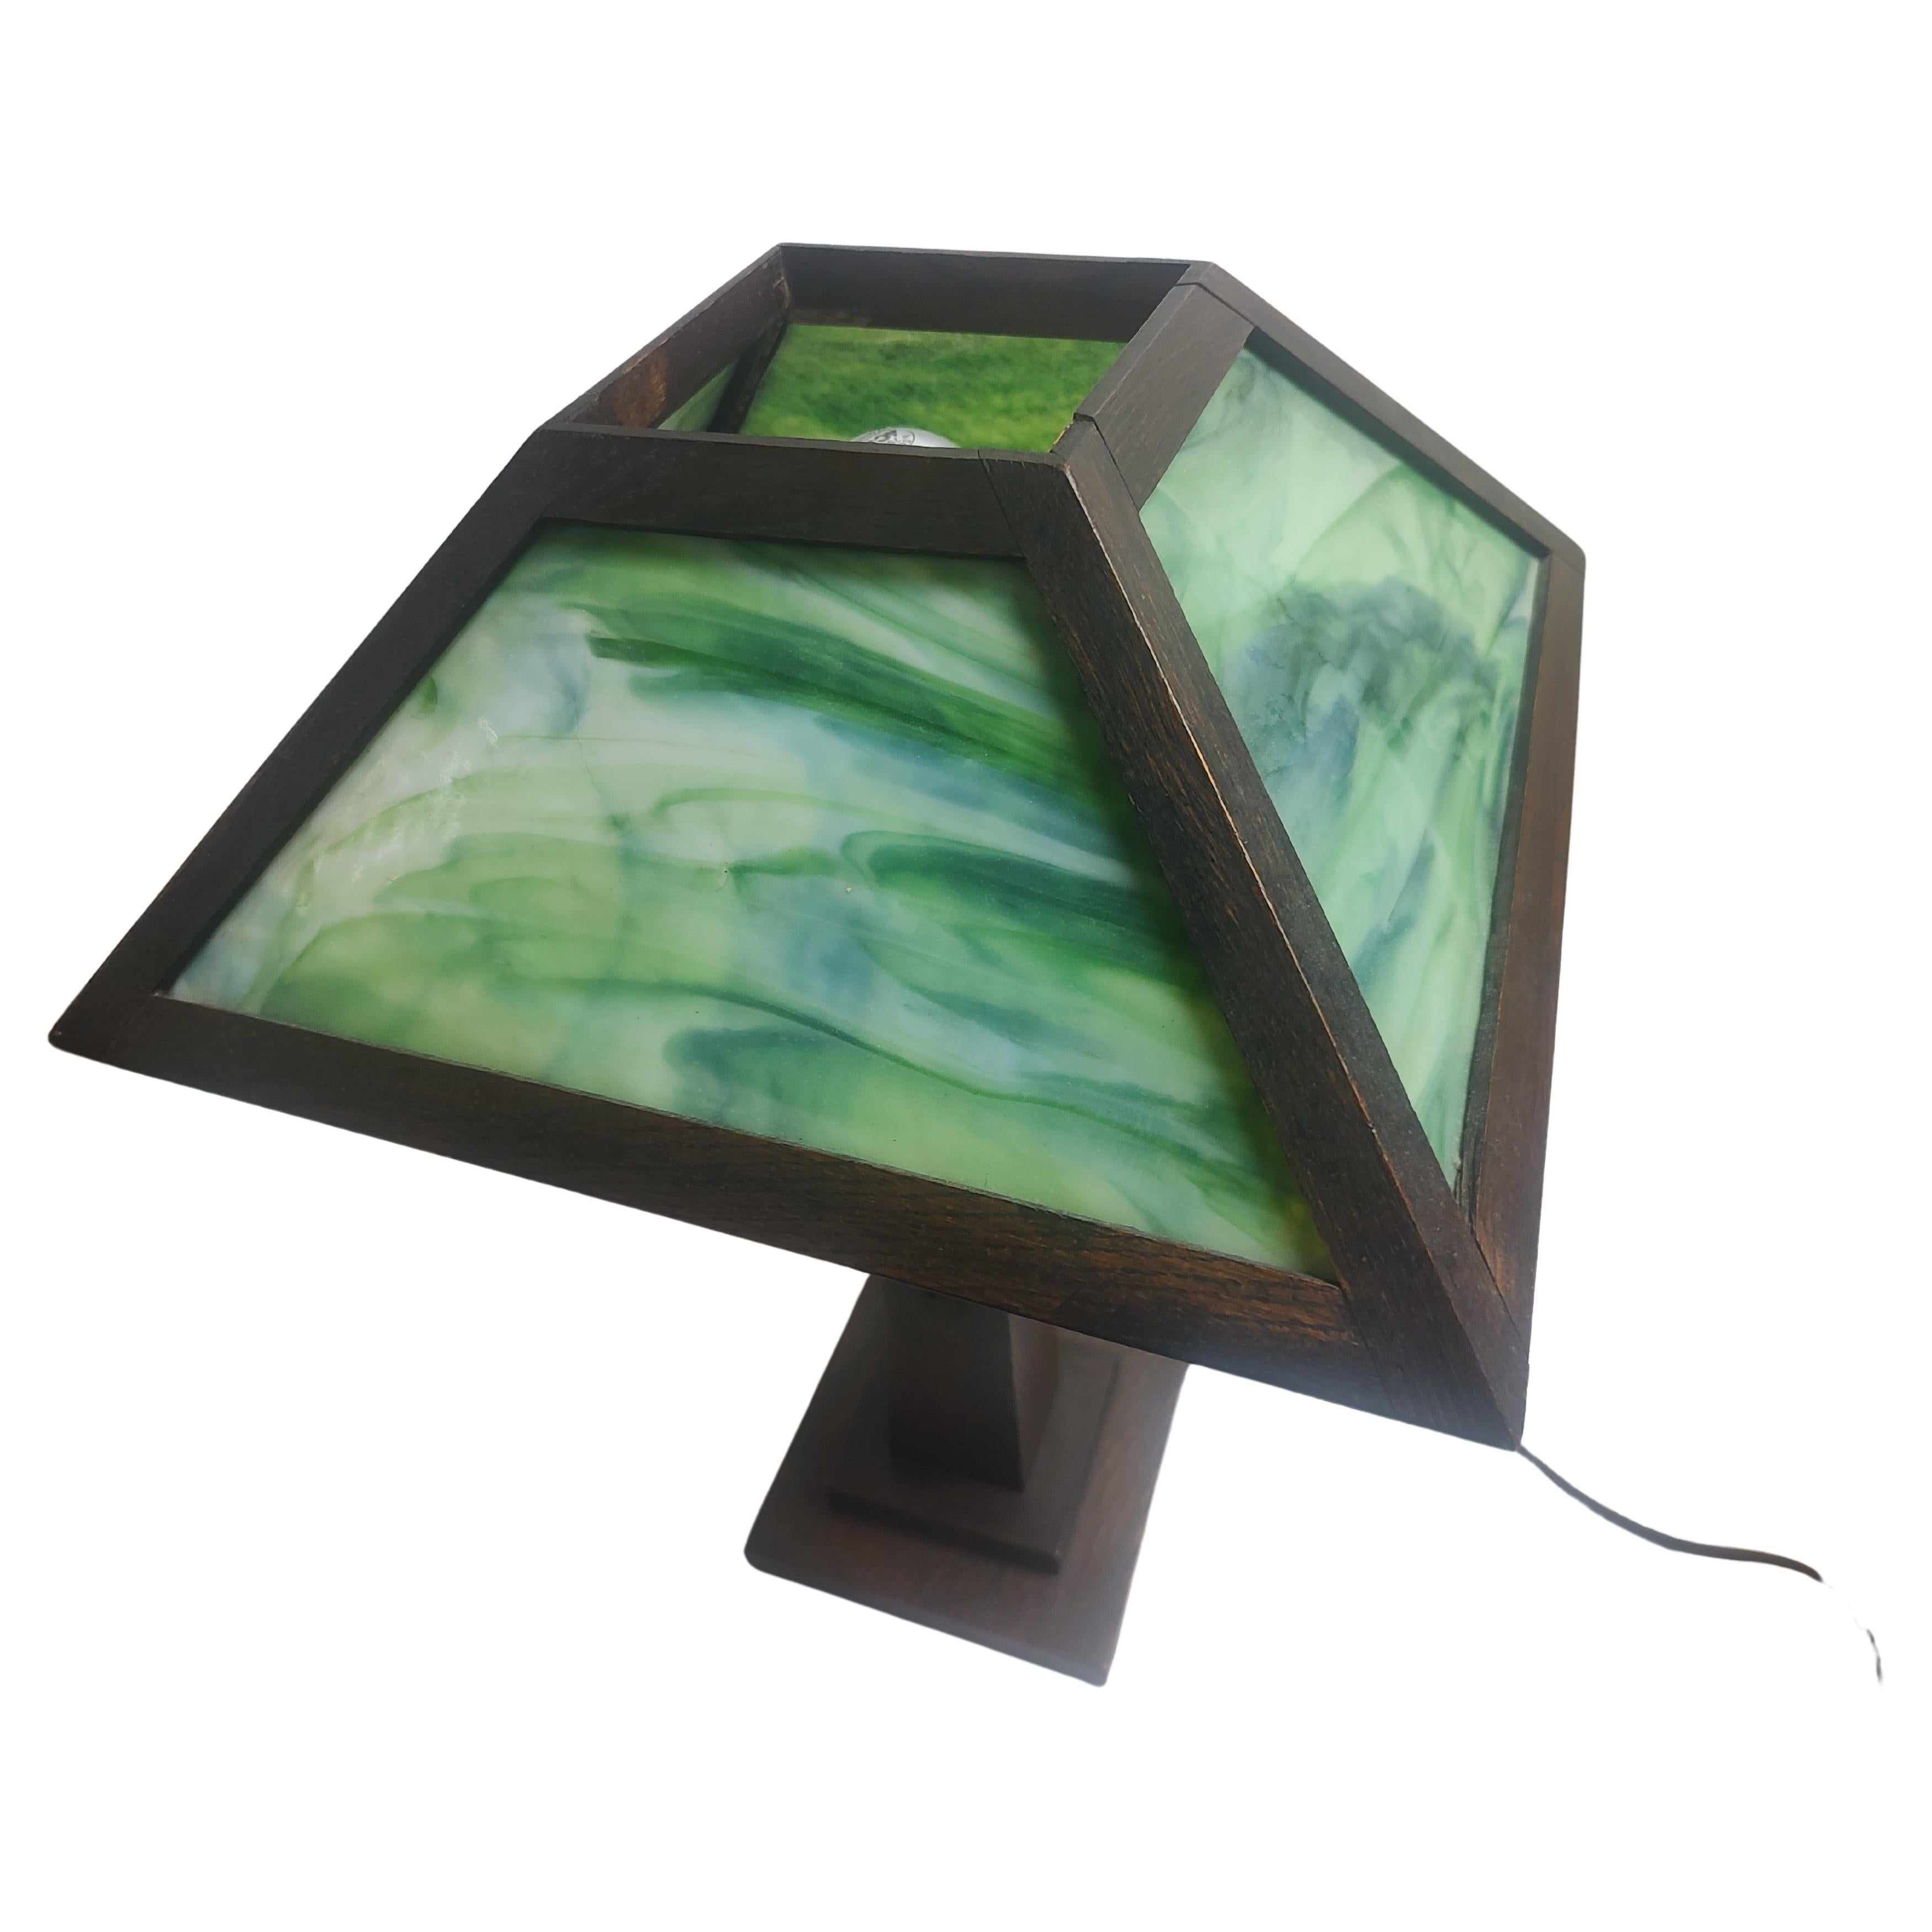 Spectacular and early version Arts & Crafts Mission table lamp, was an oil lamp and professionally converted to electric with the utmost care and respect to the piece. Beautiful green Slag Glass and quarter sawn oak with a dark stain. Silk cord with